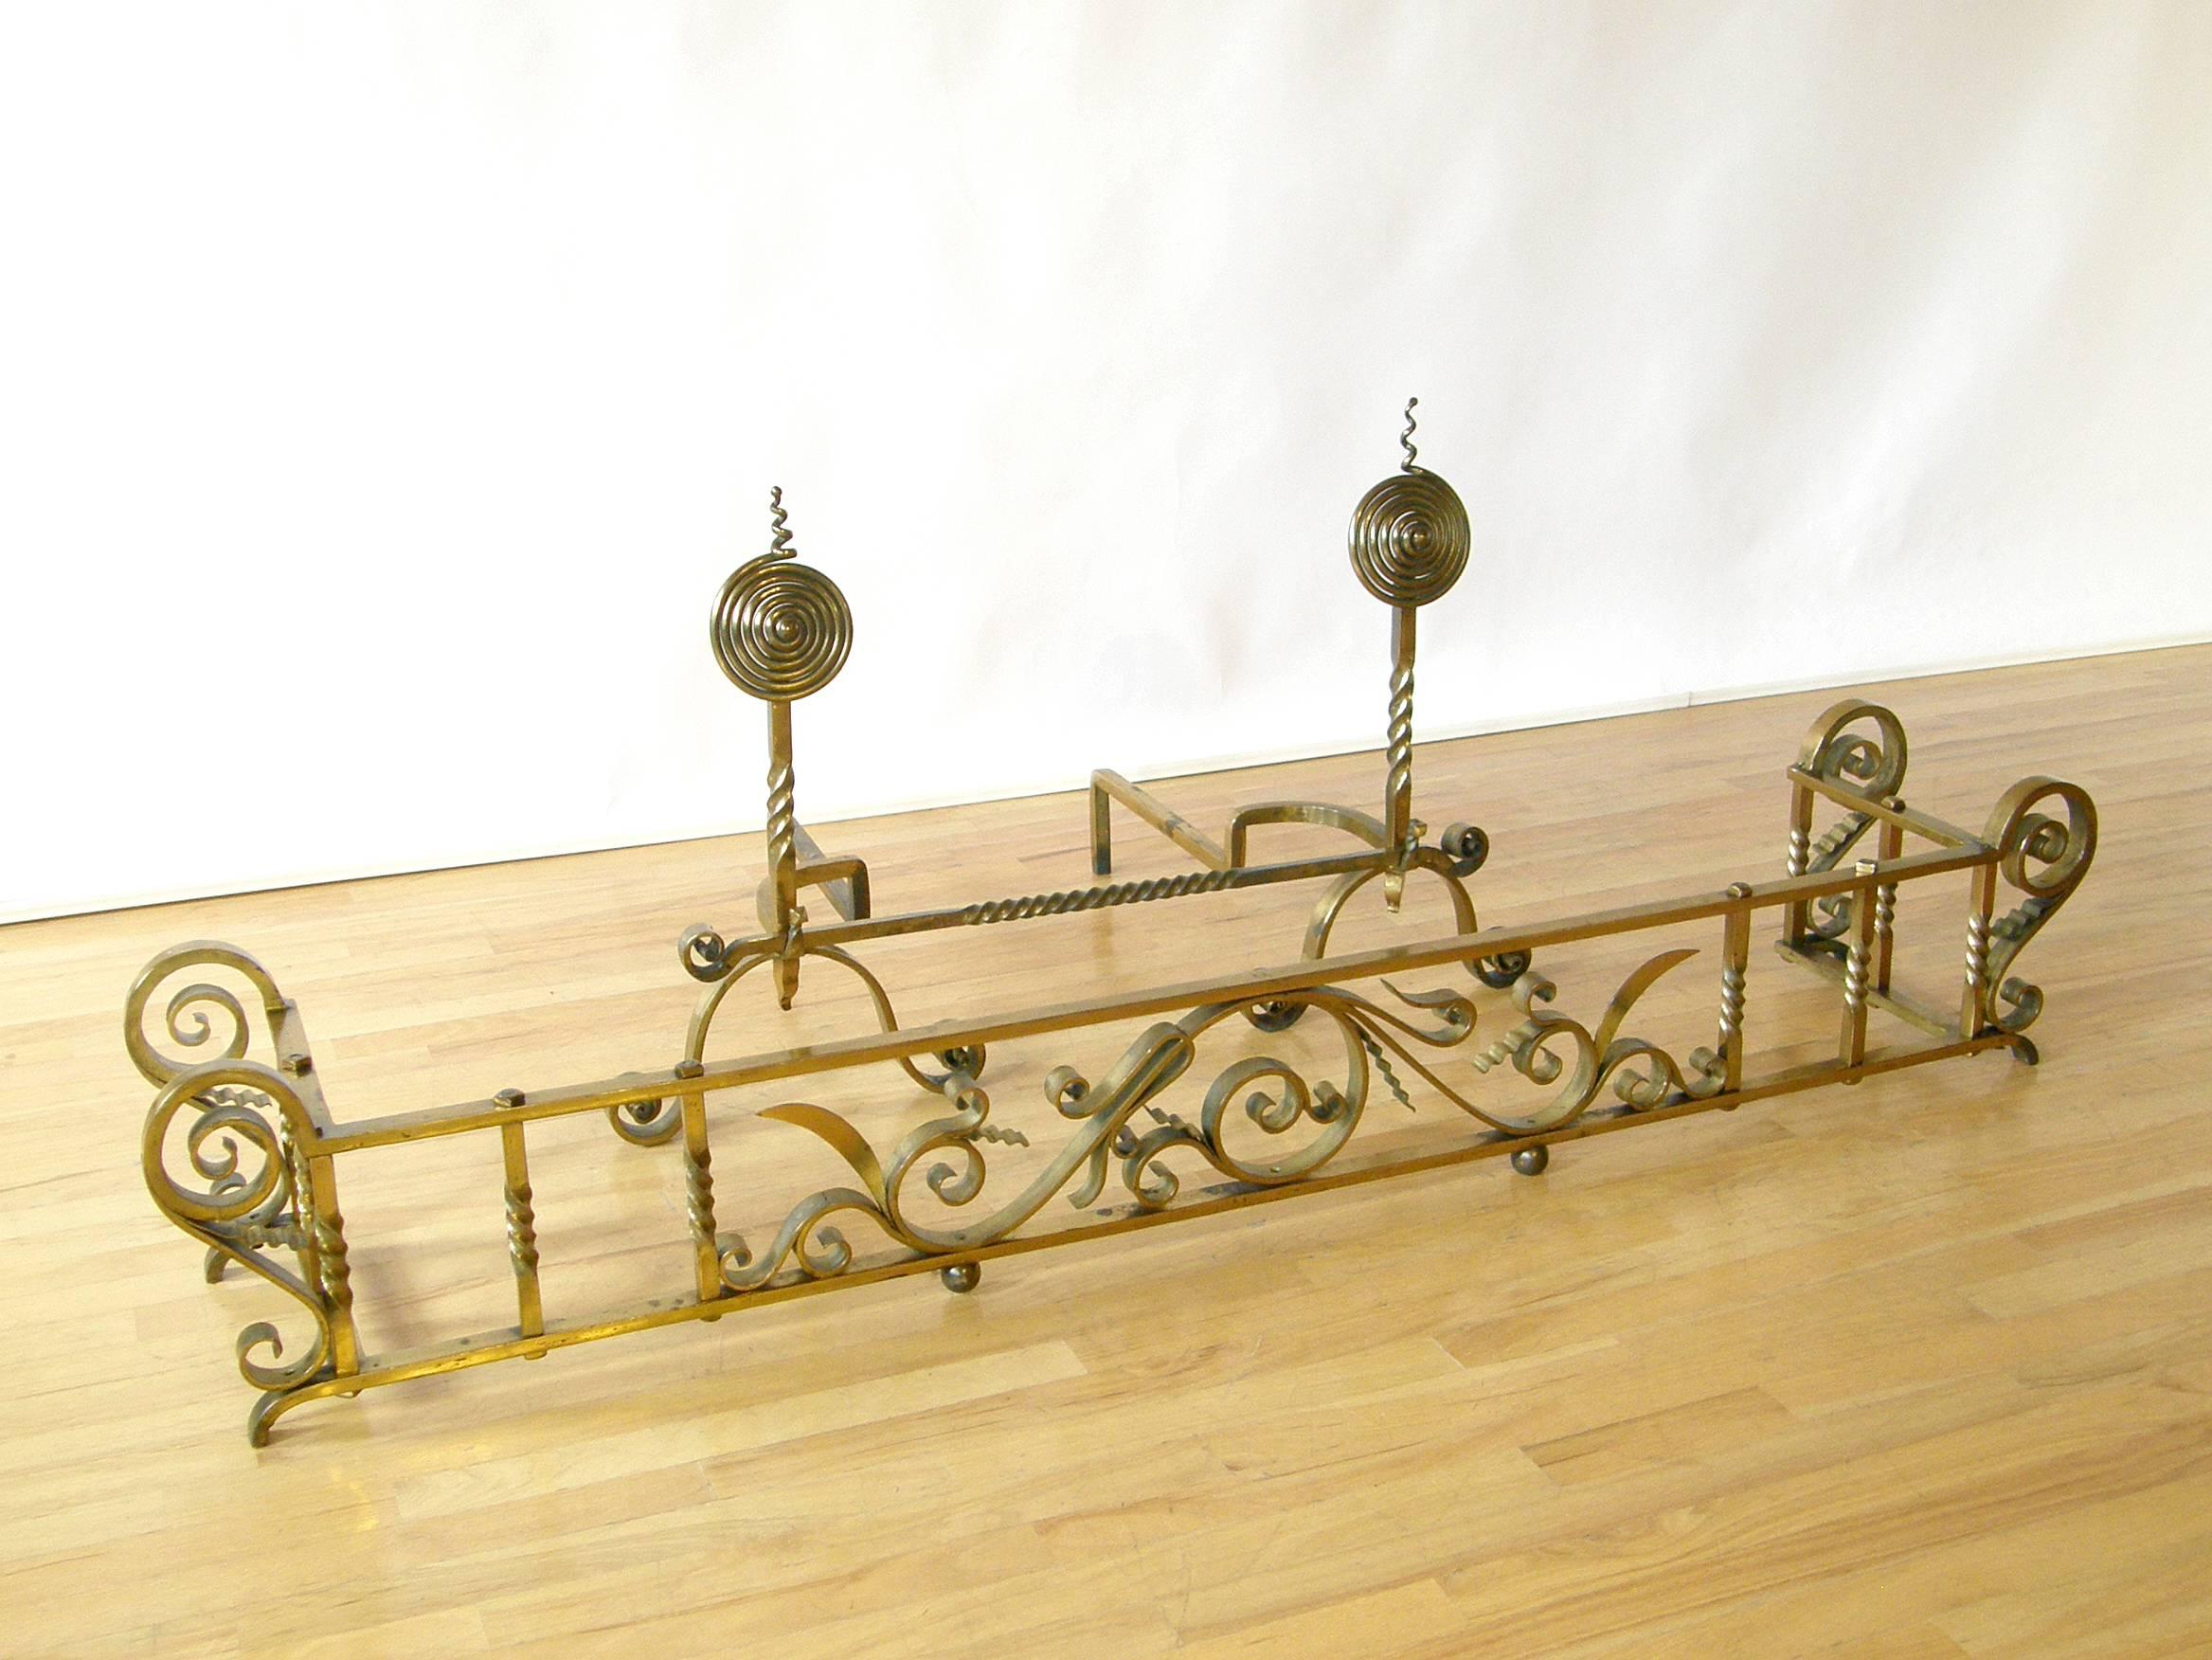 Brass-plated wrought iron fireplace set consisting of andirons with removable cross bar and fire fender. The set features twisted and coiled forms, elaborate scrolls and floral motifs. It has a nice scale and impressive presence.

Approximate